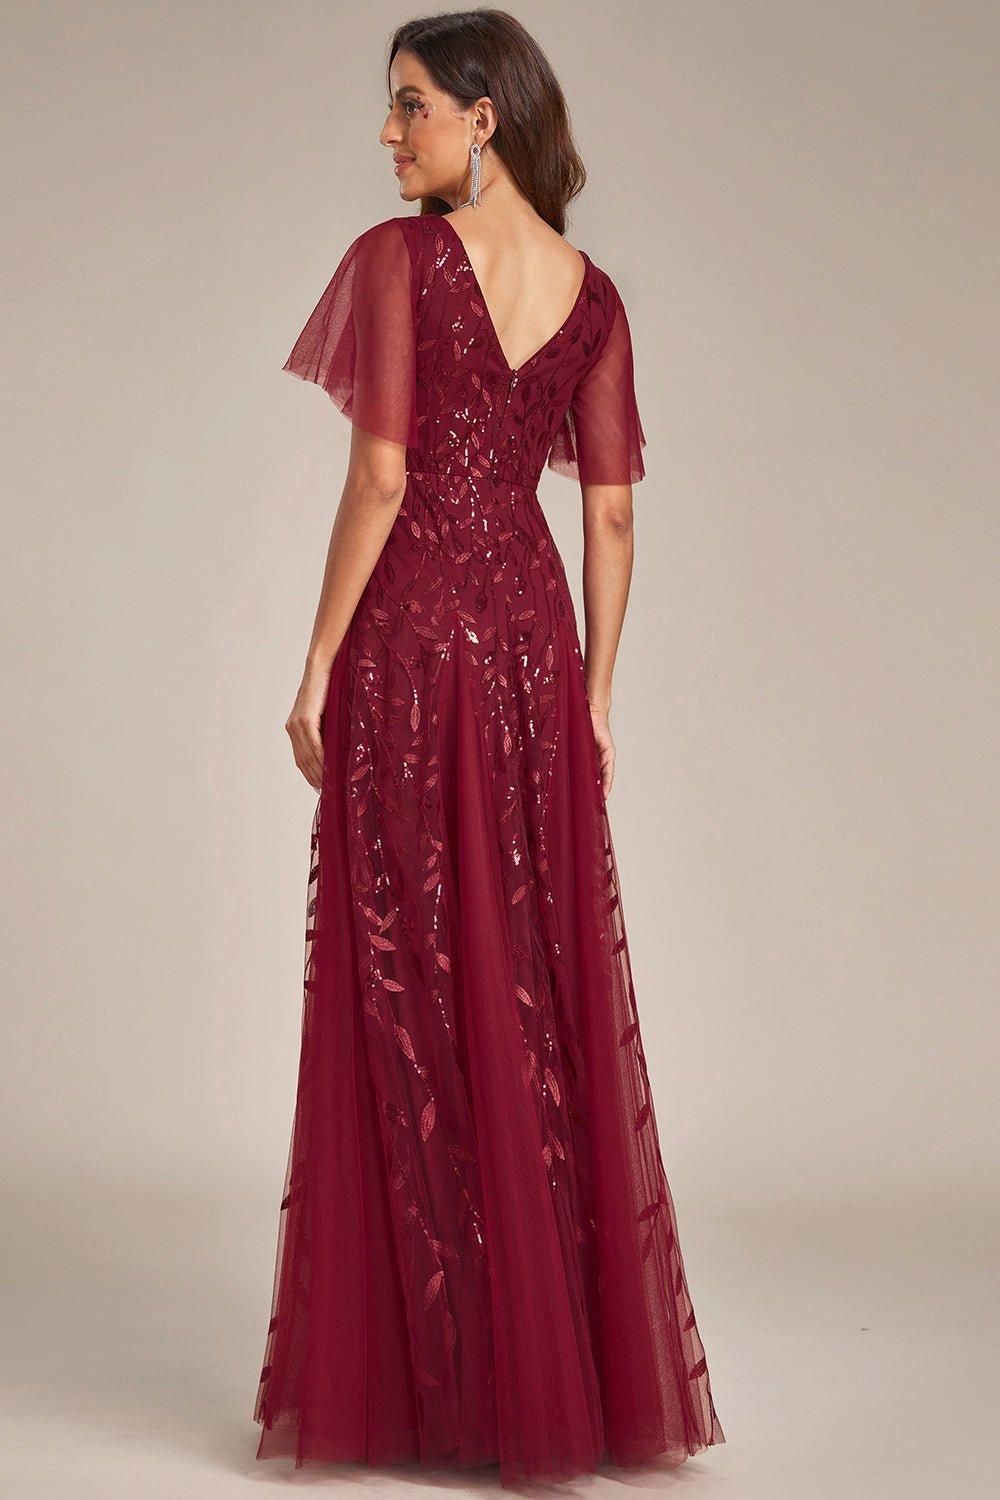 2019-2025) Evening Dress Market is thriving in world |